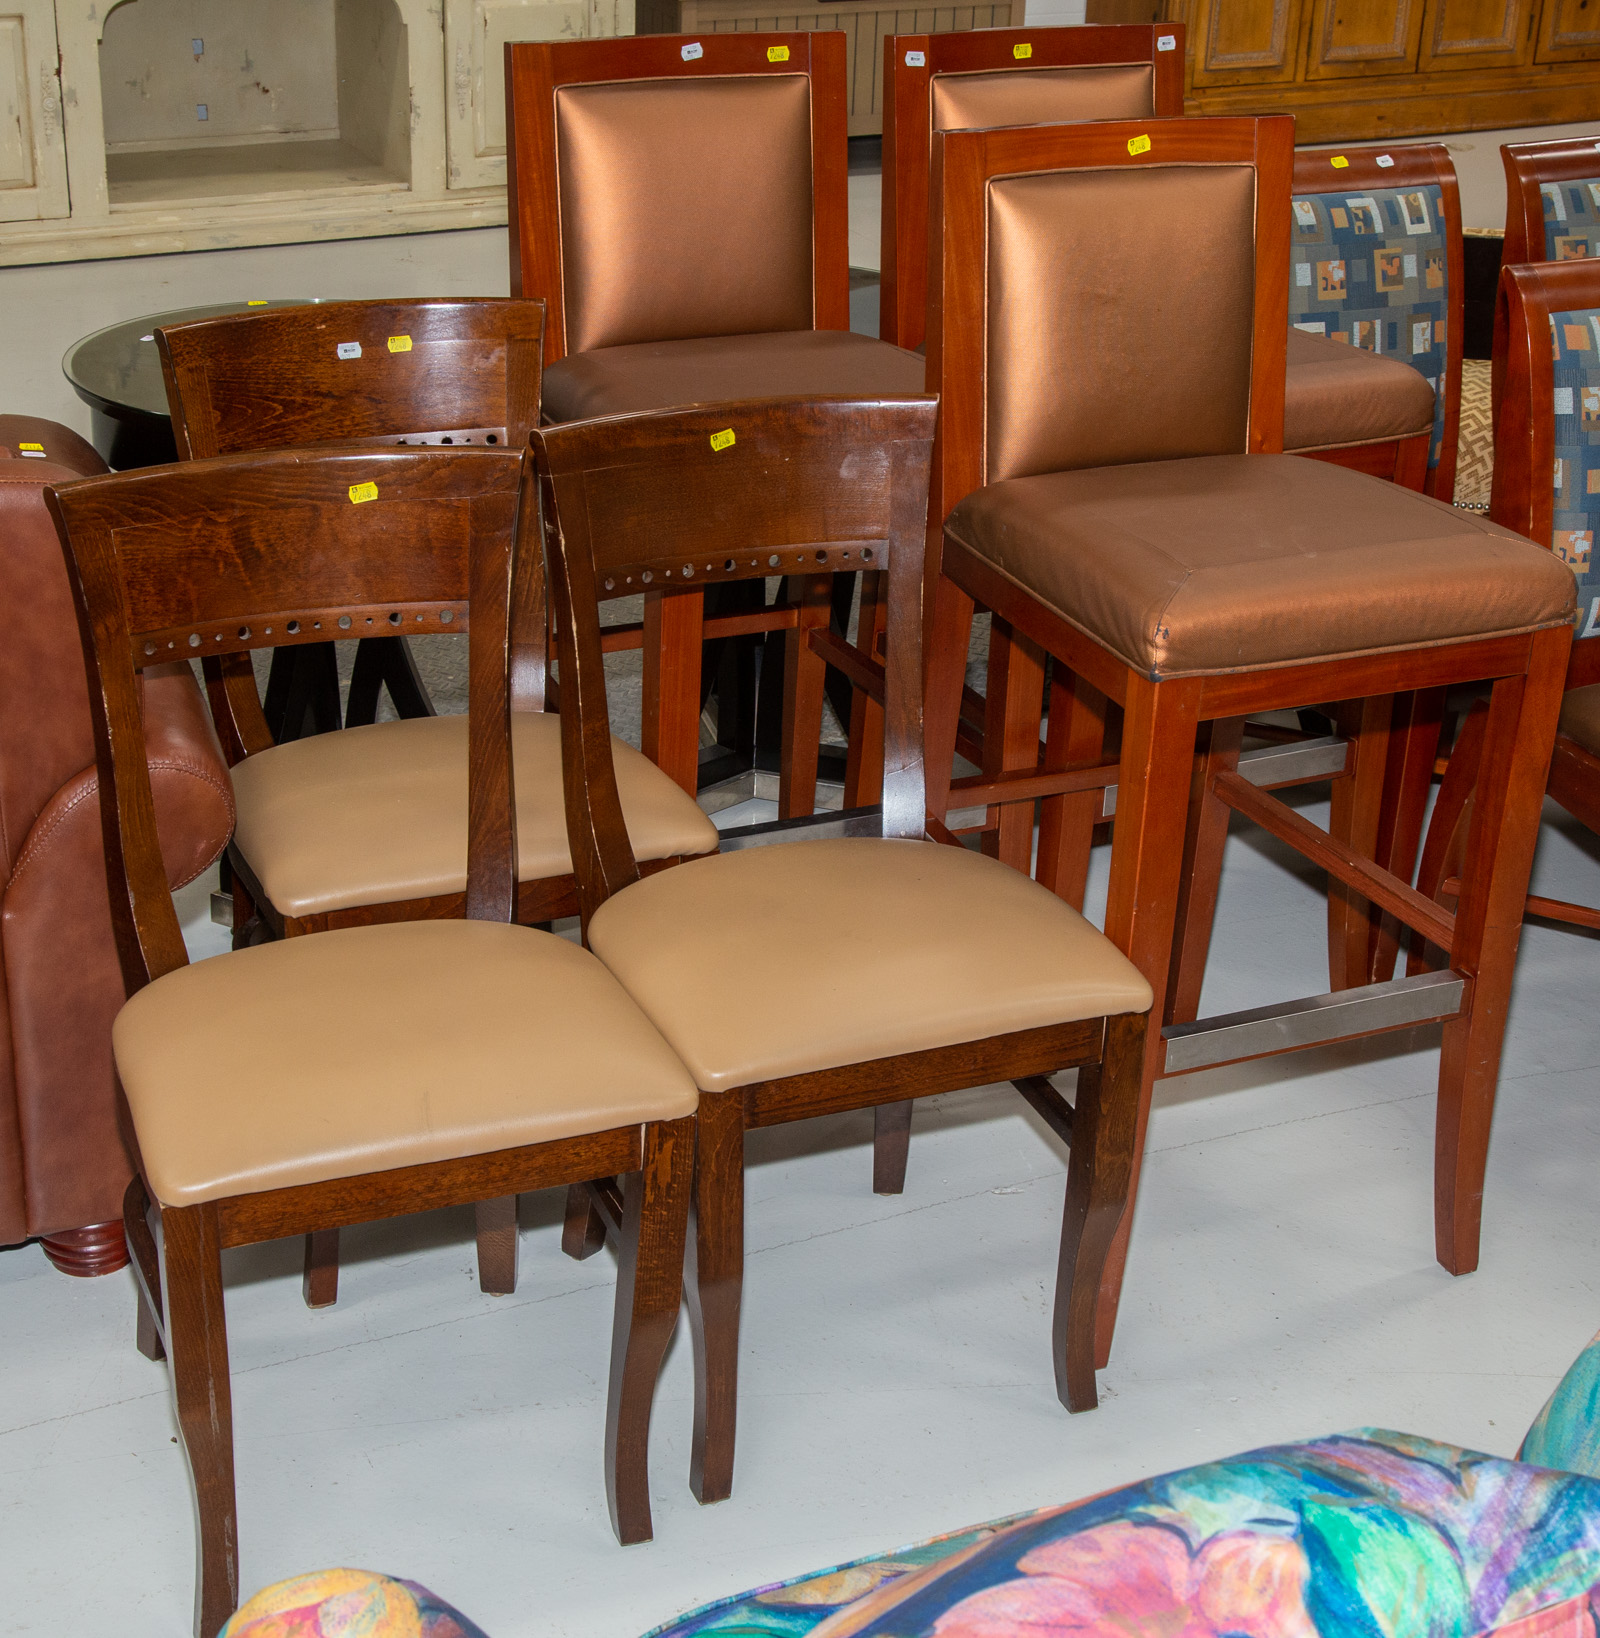 SIX CONTEMPORARY CHAIRS Comprising